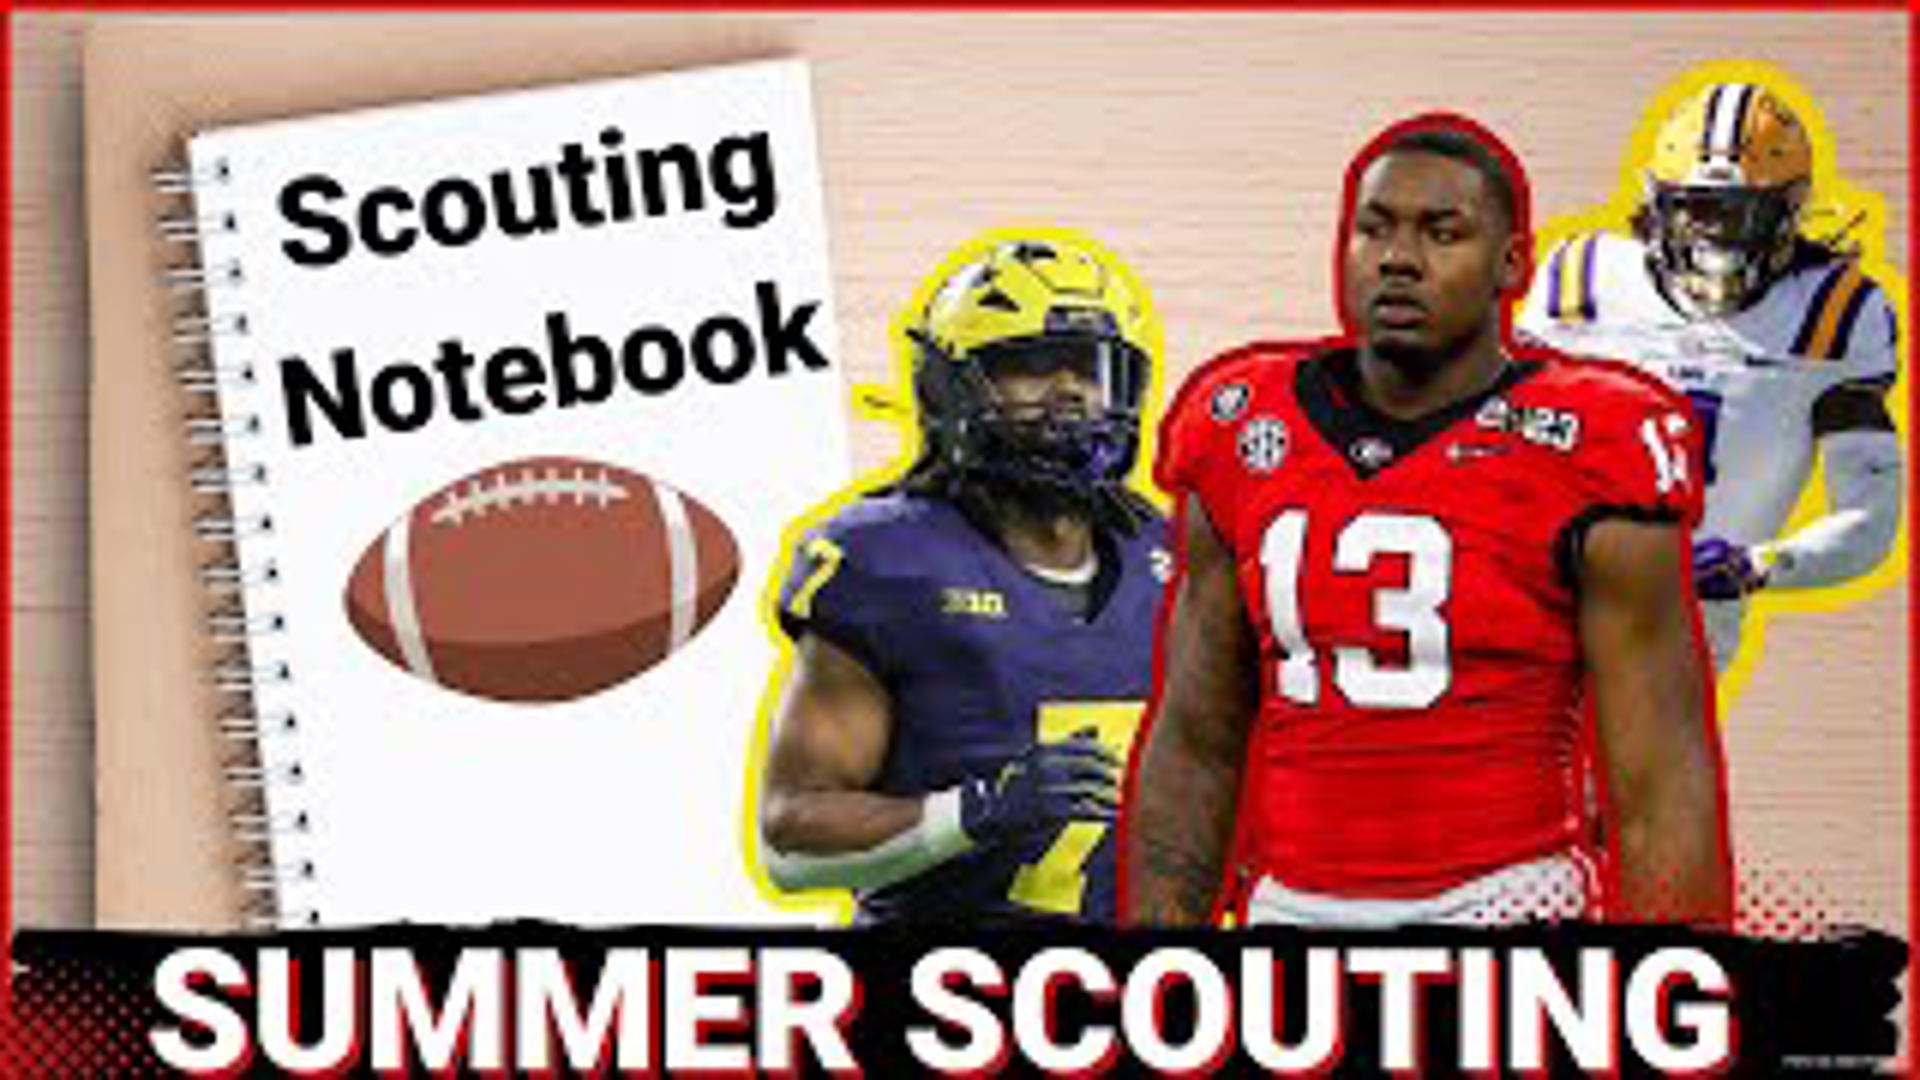 LSU's star defender Harold Perkins goes under the spotlight and Keith breaks down where he is effective and concerns with his game. Is he the next Micah Parsons?